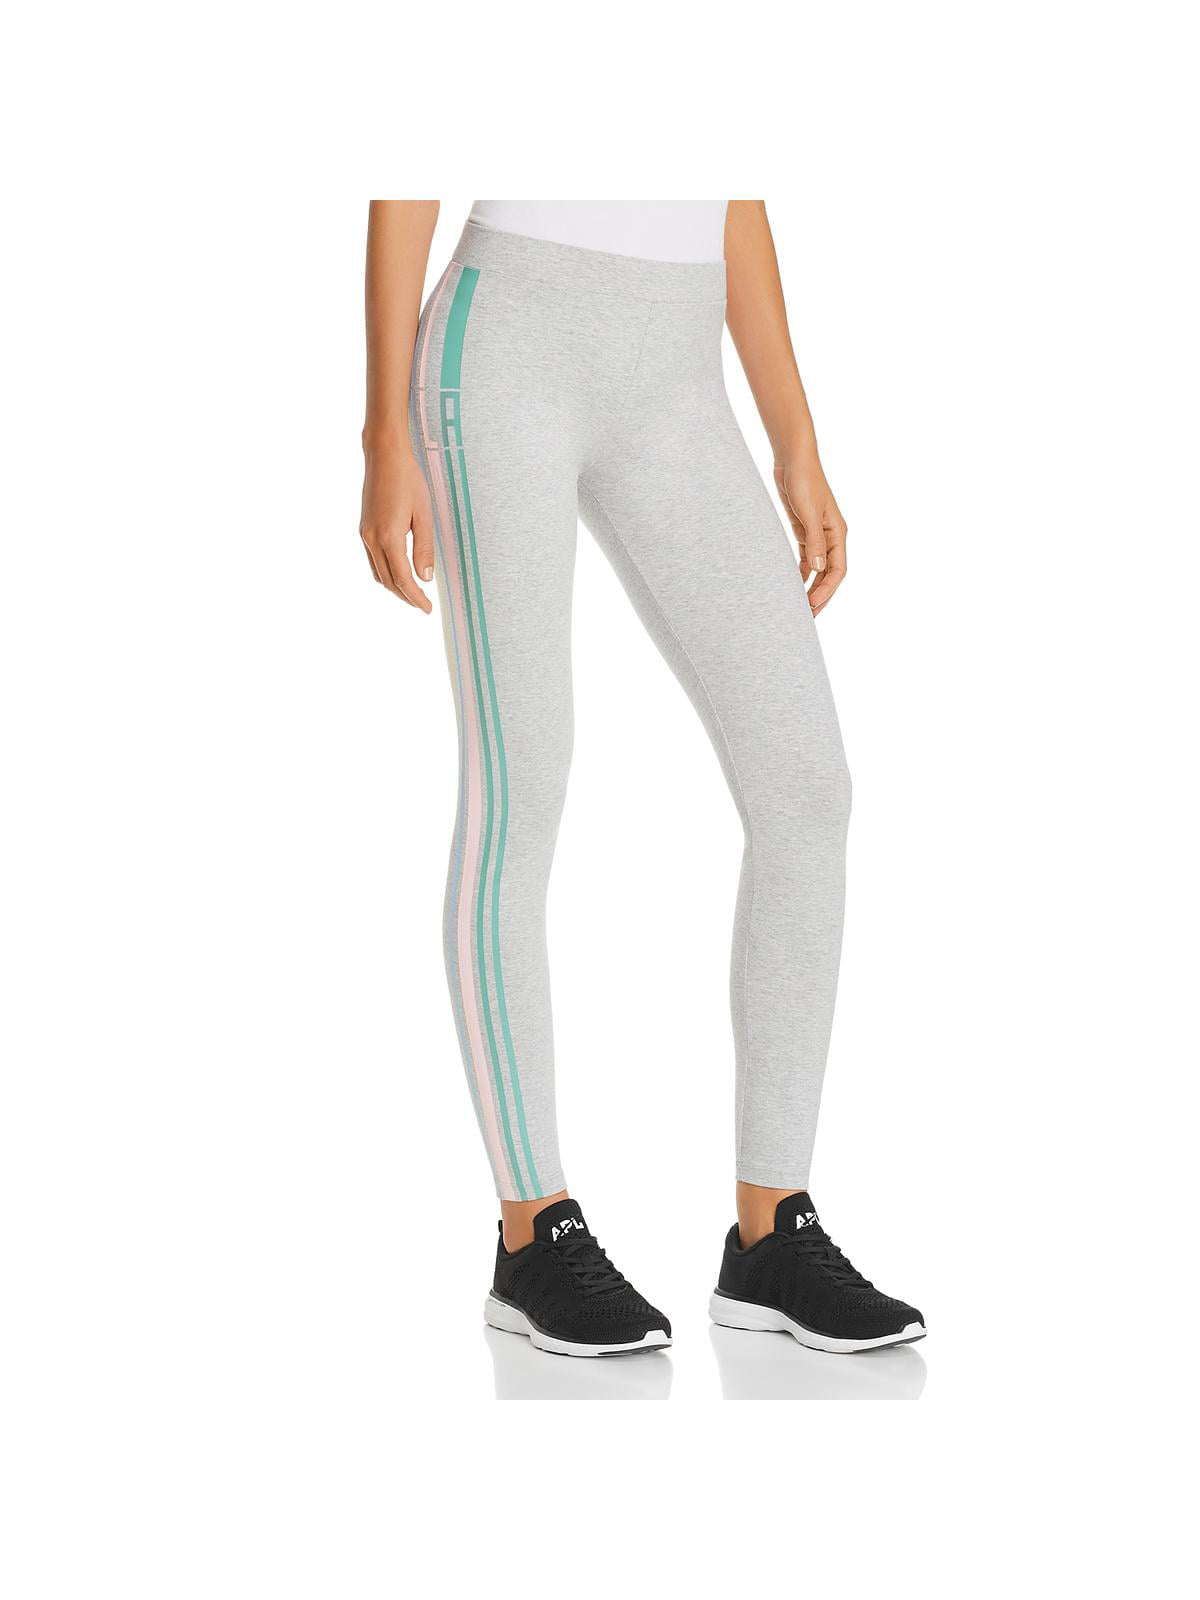 Nike Side Stripe Athletic Tights for Women